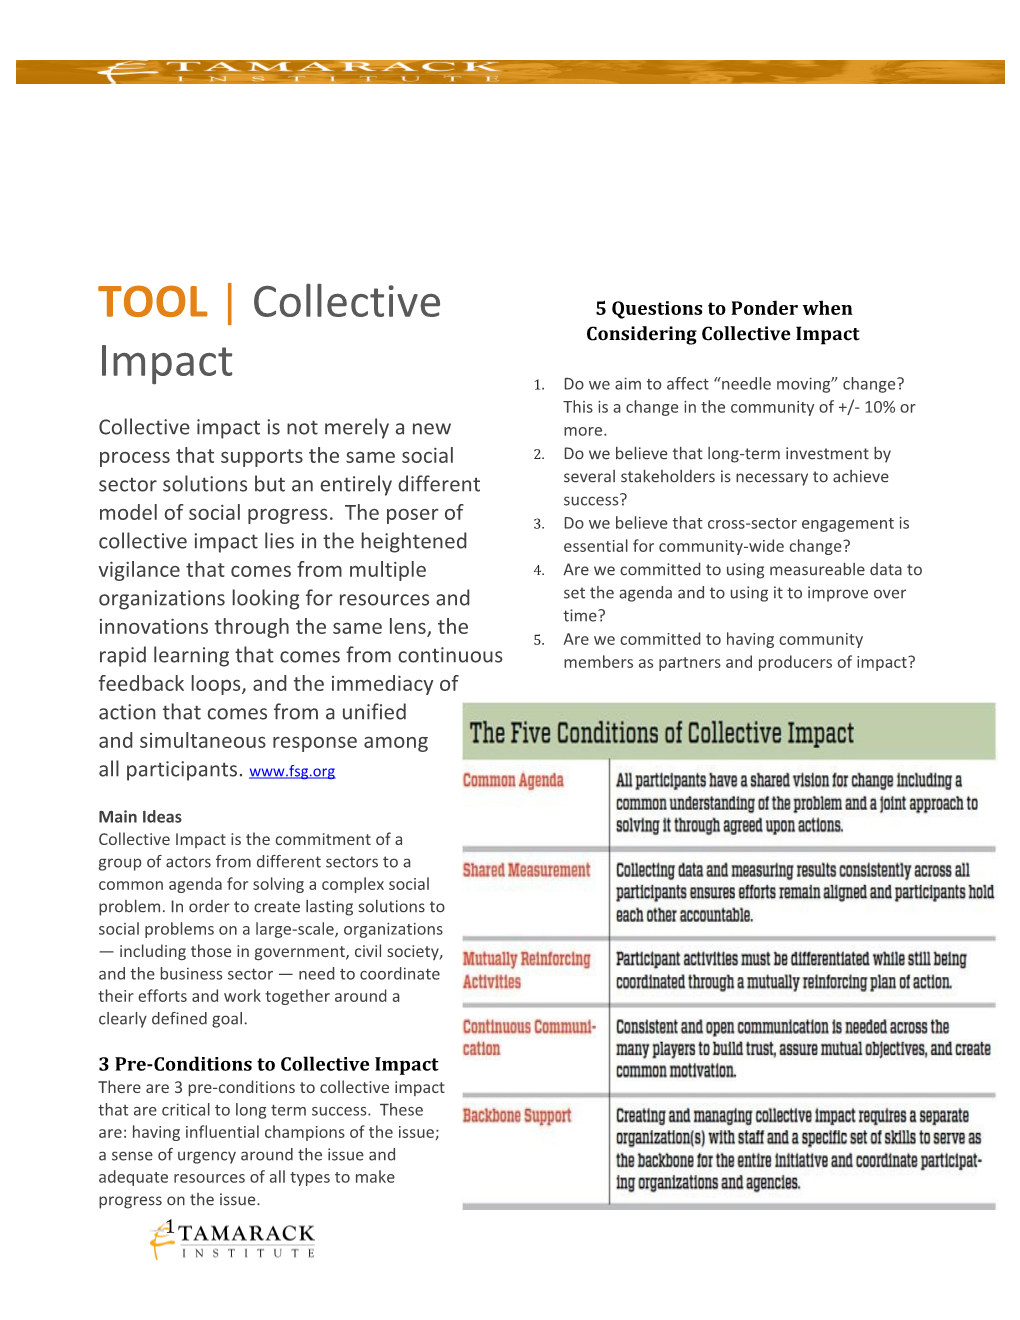 3 Pre-Conditions to Collective Impact